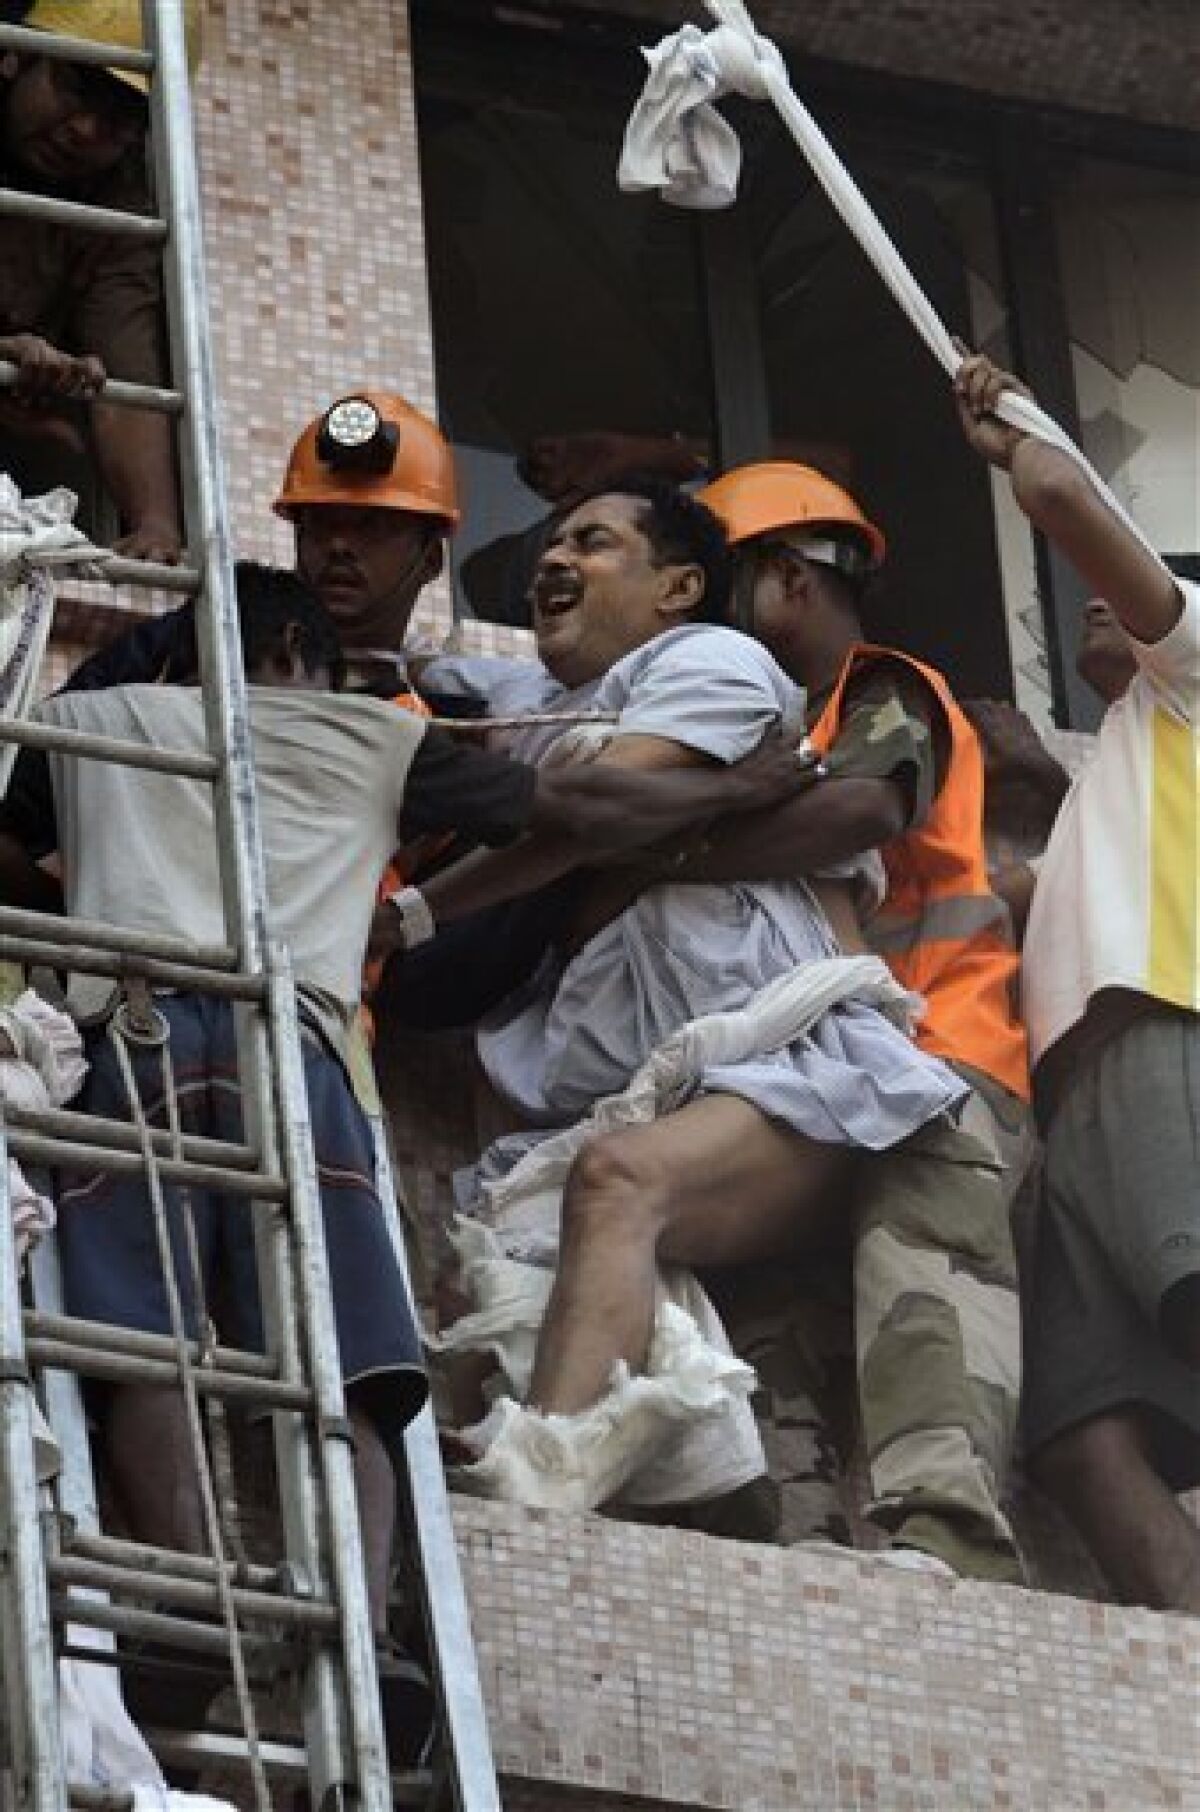 Fire officials rescue a patient as he cries in a pain, from the window of a nursing home after it caught fire in Kolkata, India, Friday, Dec. 9, 2011. A fire swept through a multistory nursing home in eastern India early Friday, trapping many elderly residents in the smoke-filled building, an official said. (AP Photo/Bikas Das)